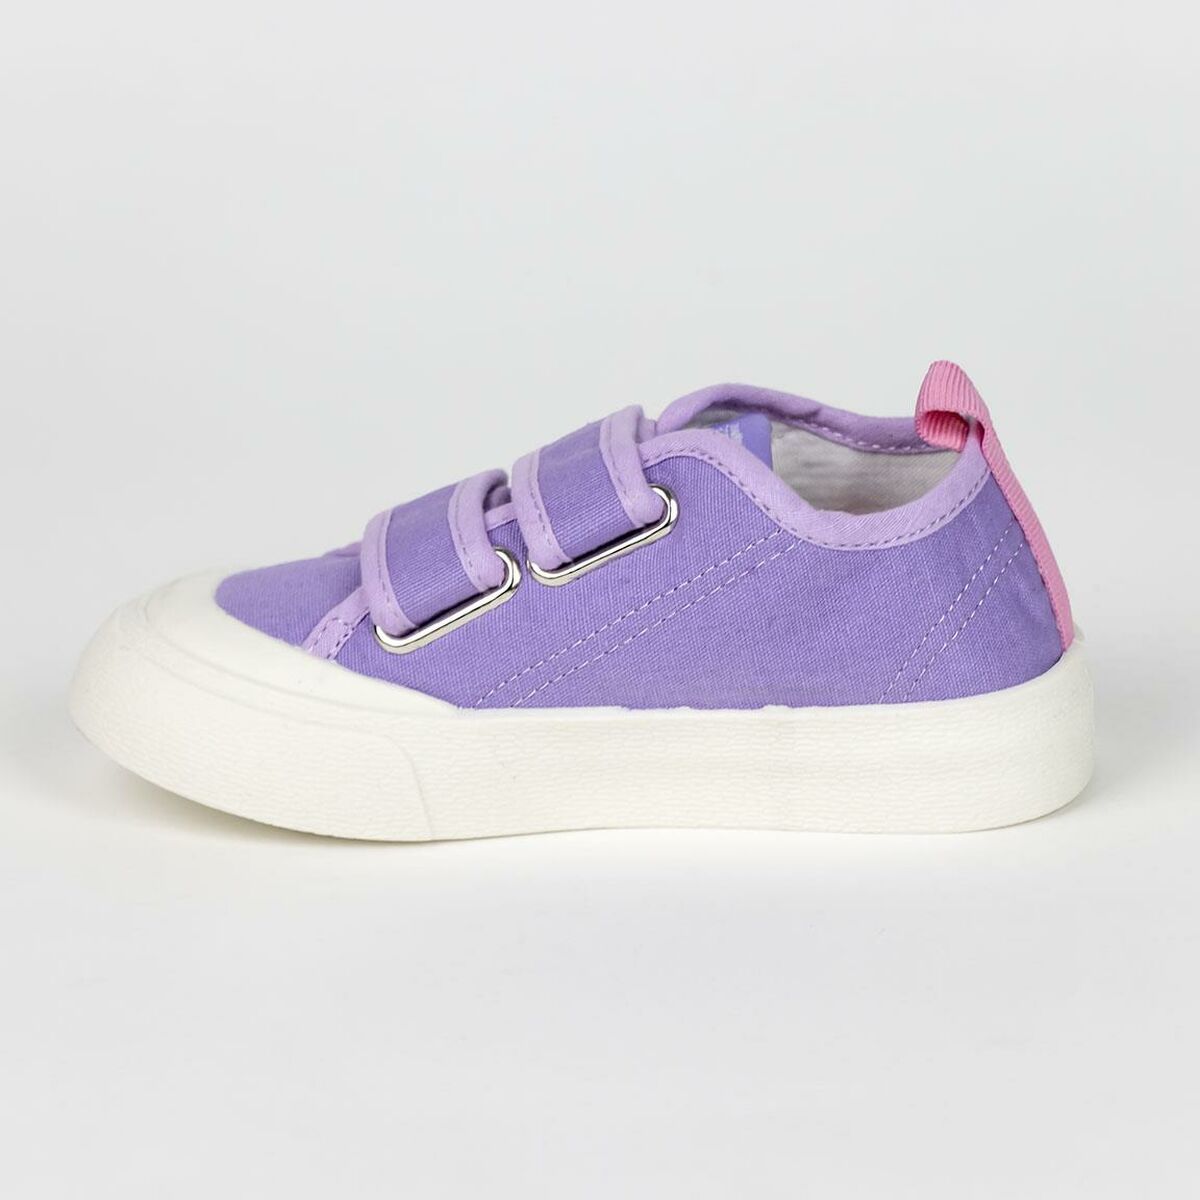 Sports Shoes for Kids Gabby's Dollhouse Purple